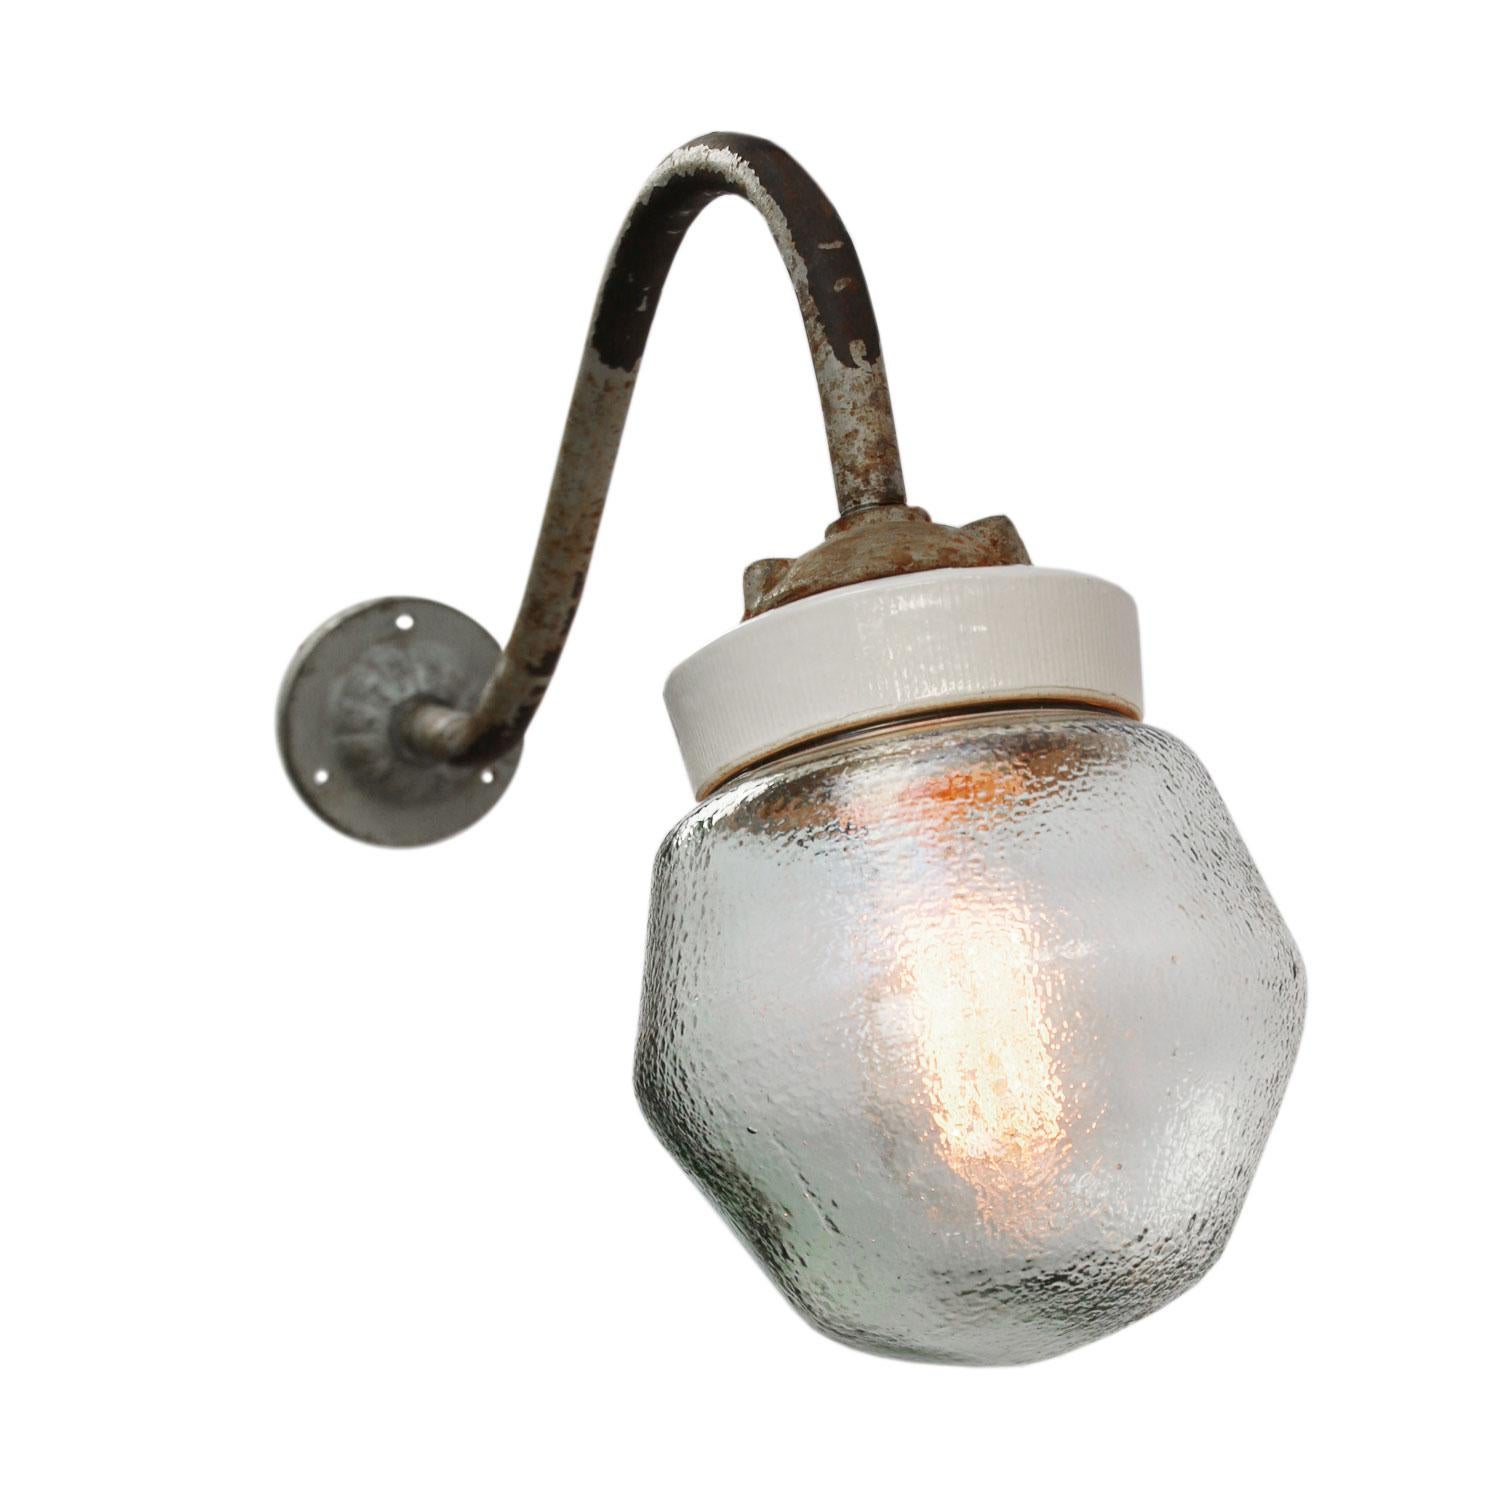 Industrial wall light .
cast iron and porcelain top, frosted glass.
diameter cast iron wall mount: 9 cm, 3 holes to secure.

Weight: 2.00 kg / 4.4 lb

Priced per individual item. All lamps have been made suitable by international standards for